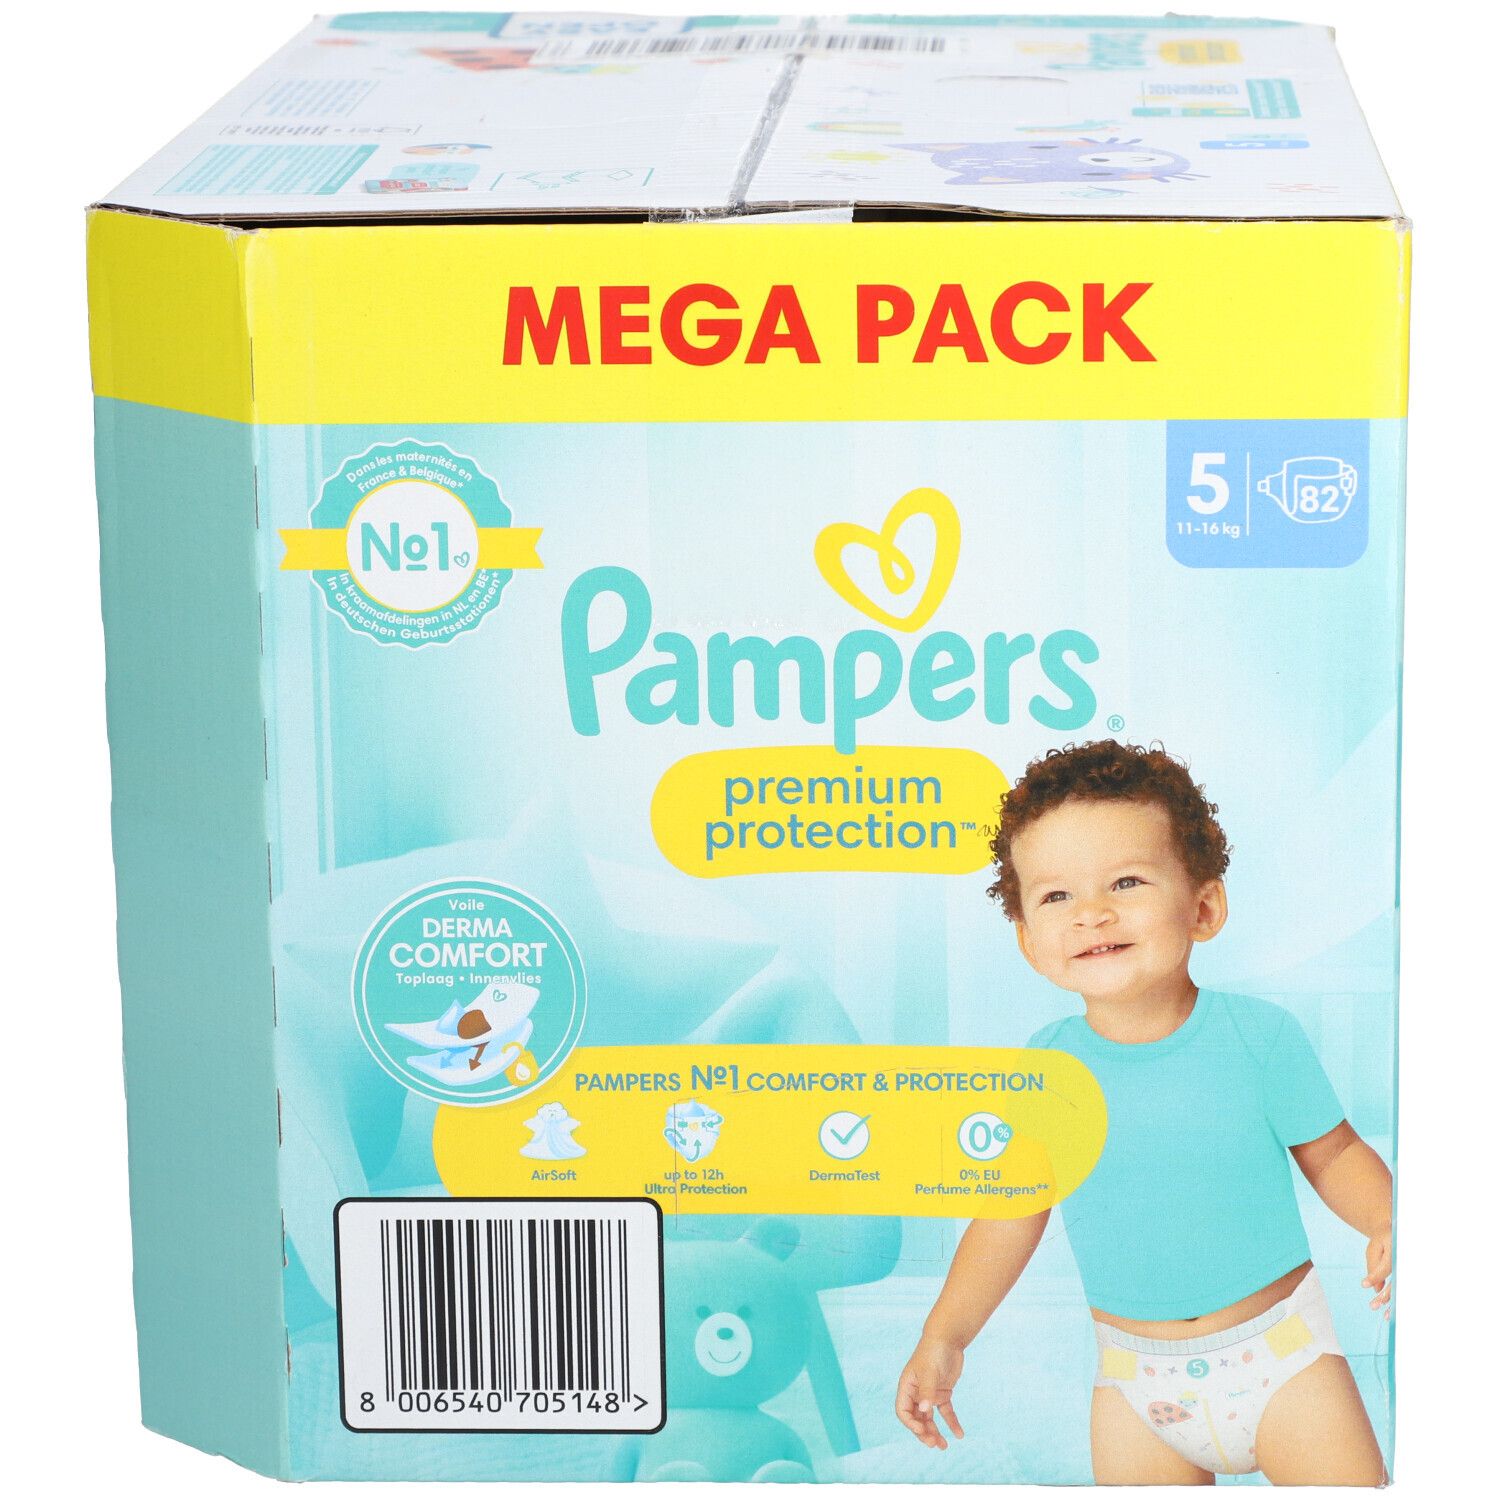 PAMPERS PREMIUM PROTECTION - Couche. Taille 5, 11 kg à 16 kg - megapack - sac 82